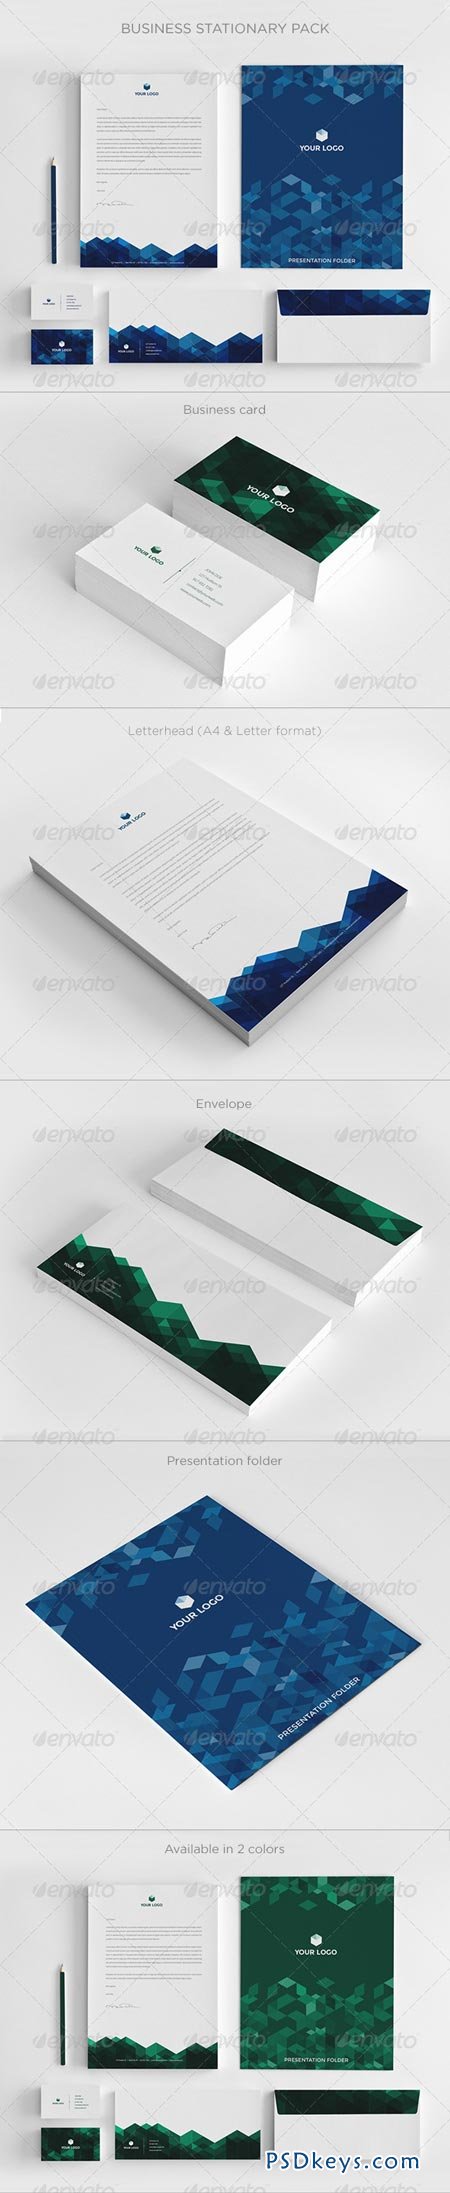 Business Stationary Pack II 6380354